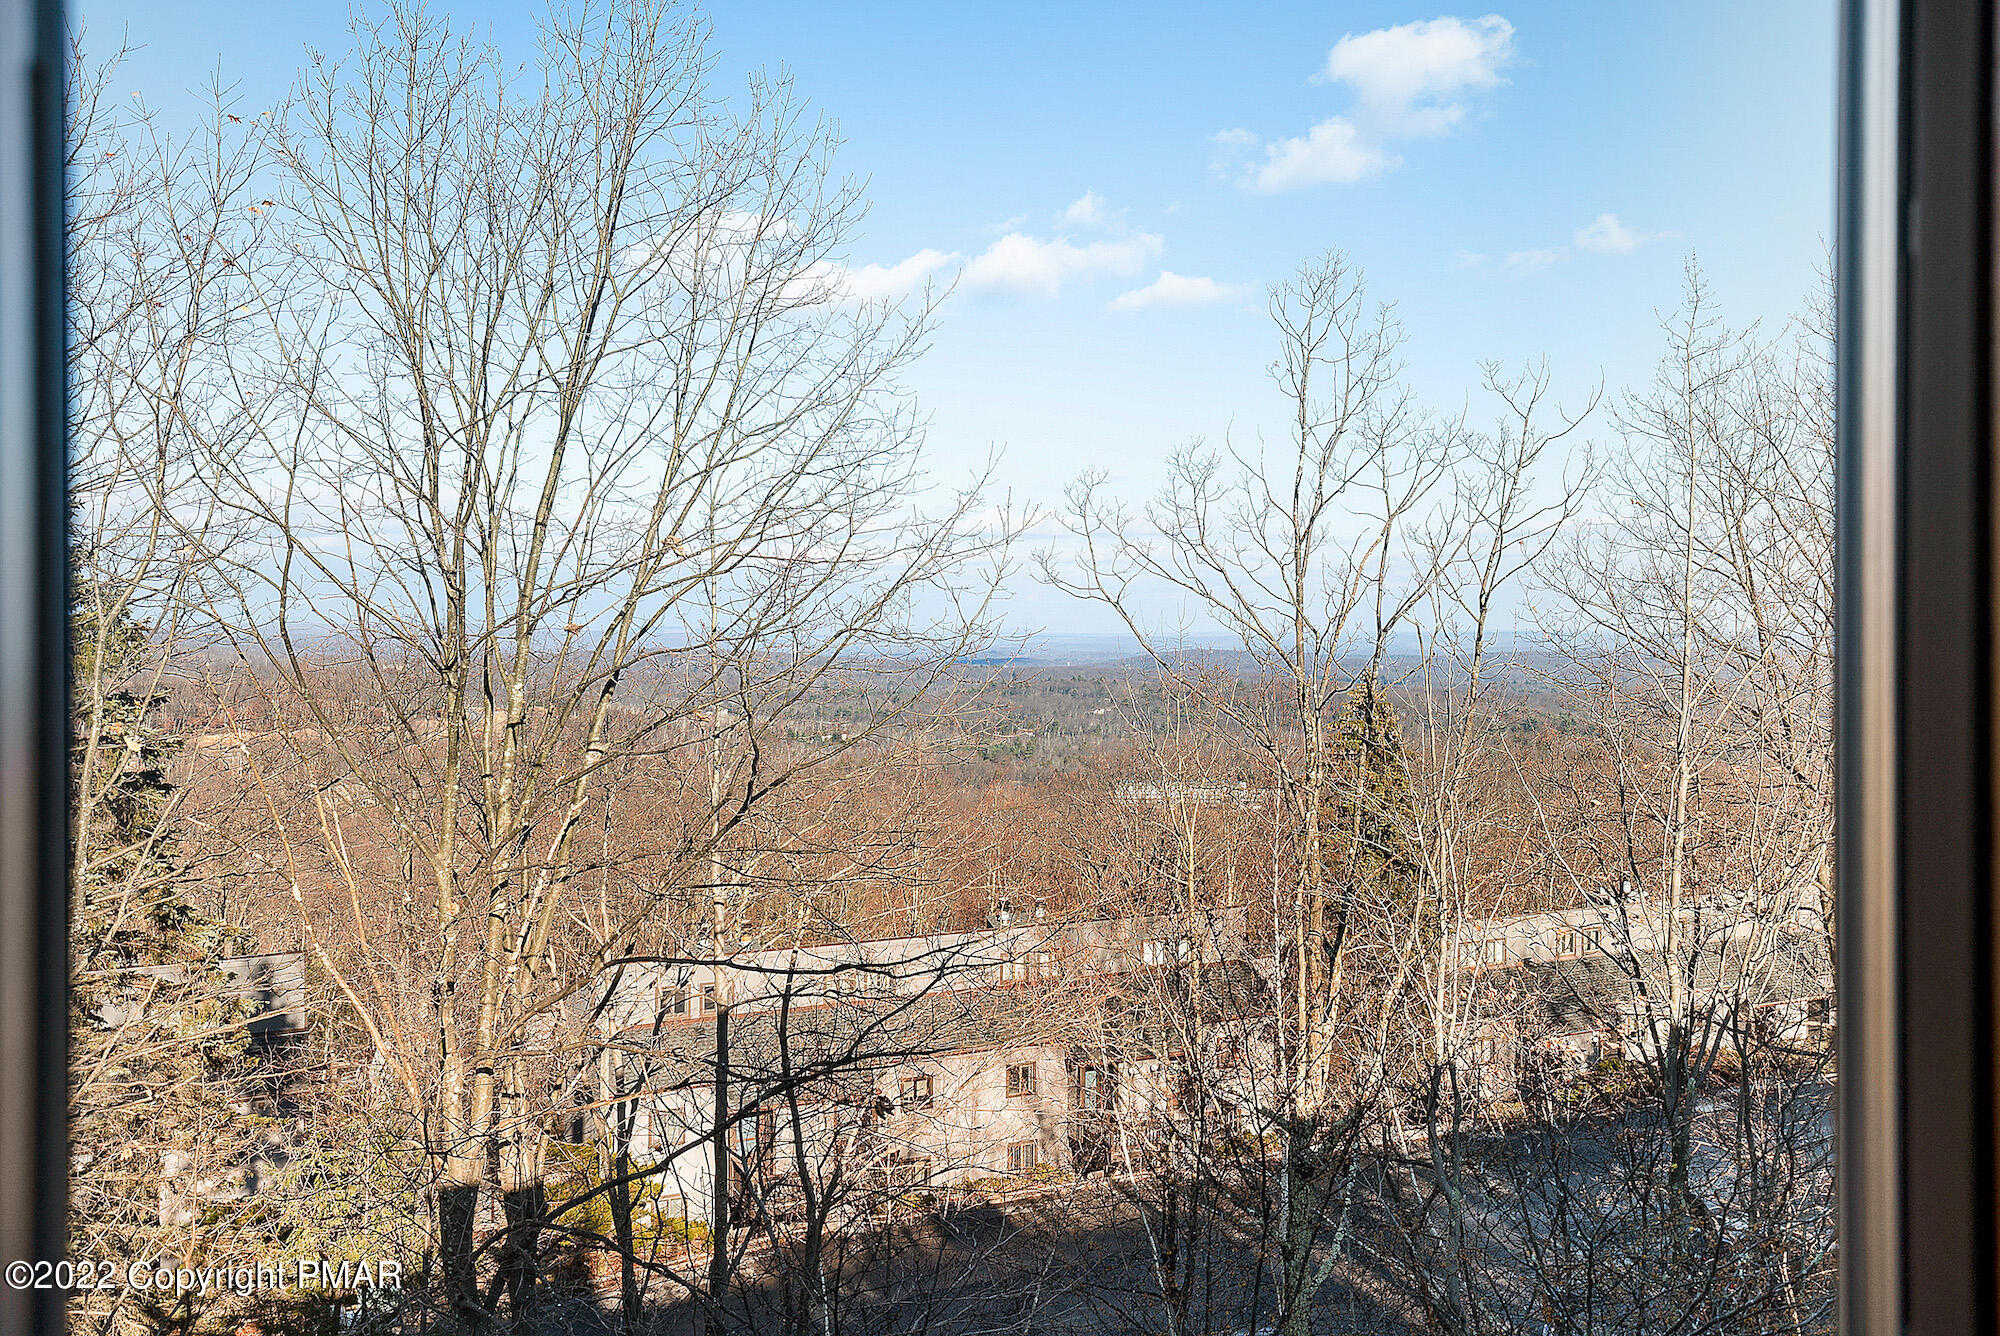 View Tannersville, PA 18372 residential property